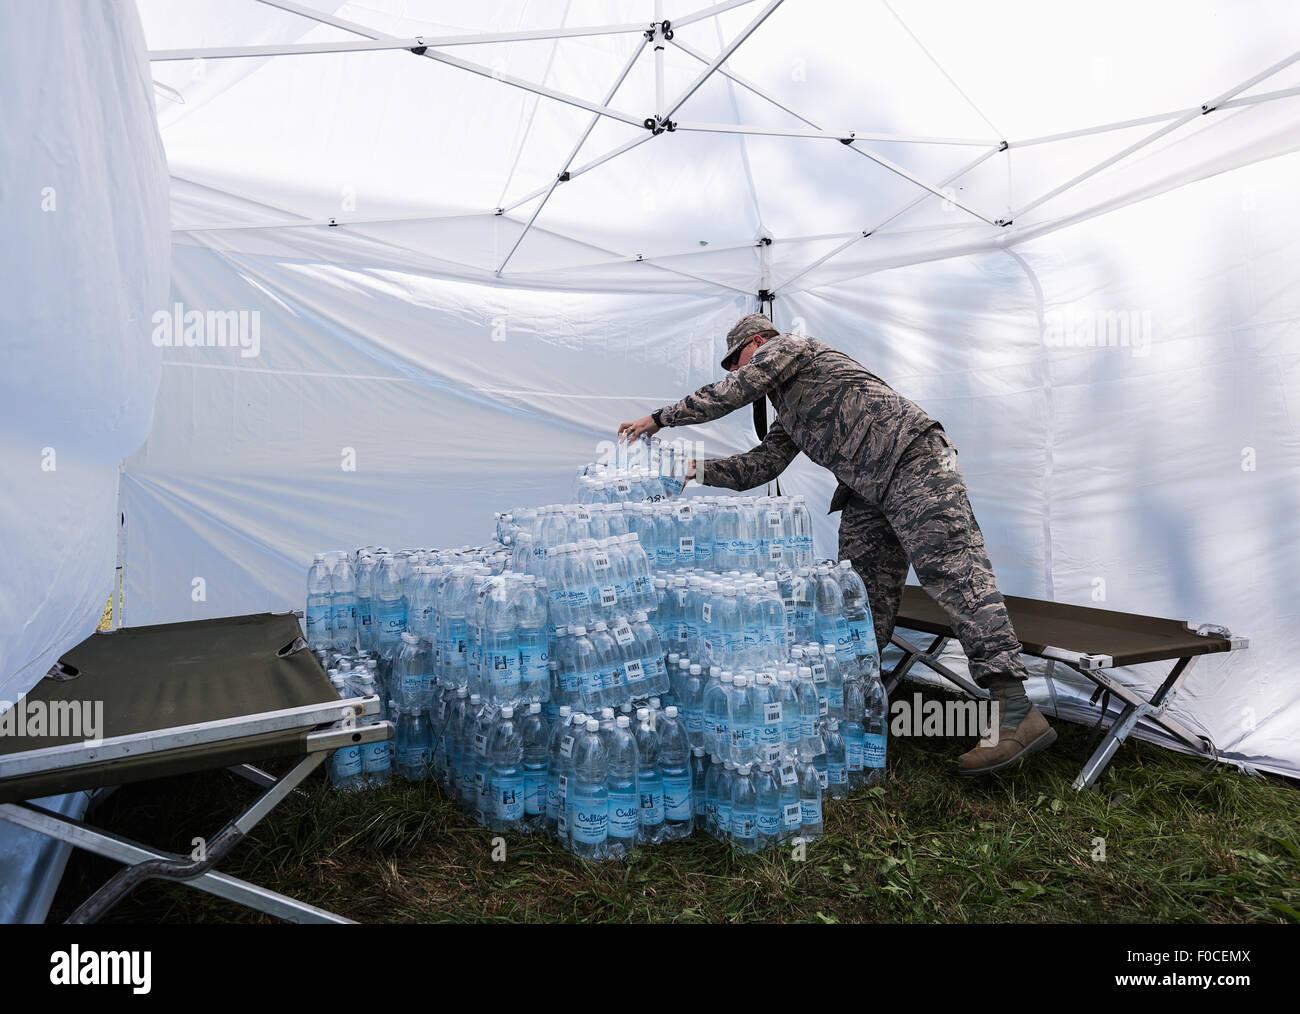 Engelmannsreuth, Germany. 12th Aug, 2015. A soldier of the US armed forces piles up water bottles in the aftermath of a crashed plane near Engelmannsreuth, Germany, 12 August 2015. A US Air Force F-16 crashed near Engelmannsreuth, Germany, on 11 August 2015. Rescue operations are still taking place. Photo: NICOLAS ARMER/dpa/Alamy Live News Stock Photo